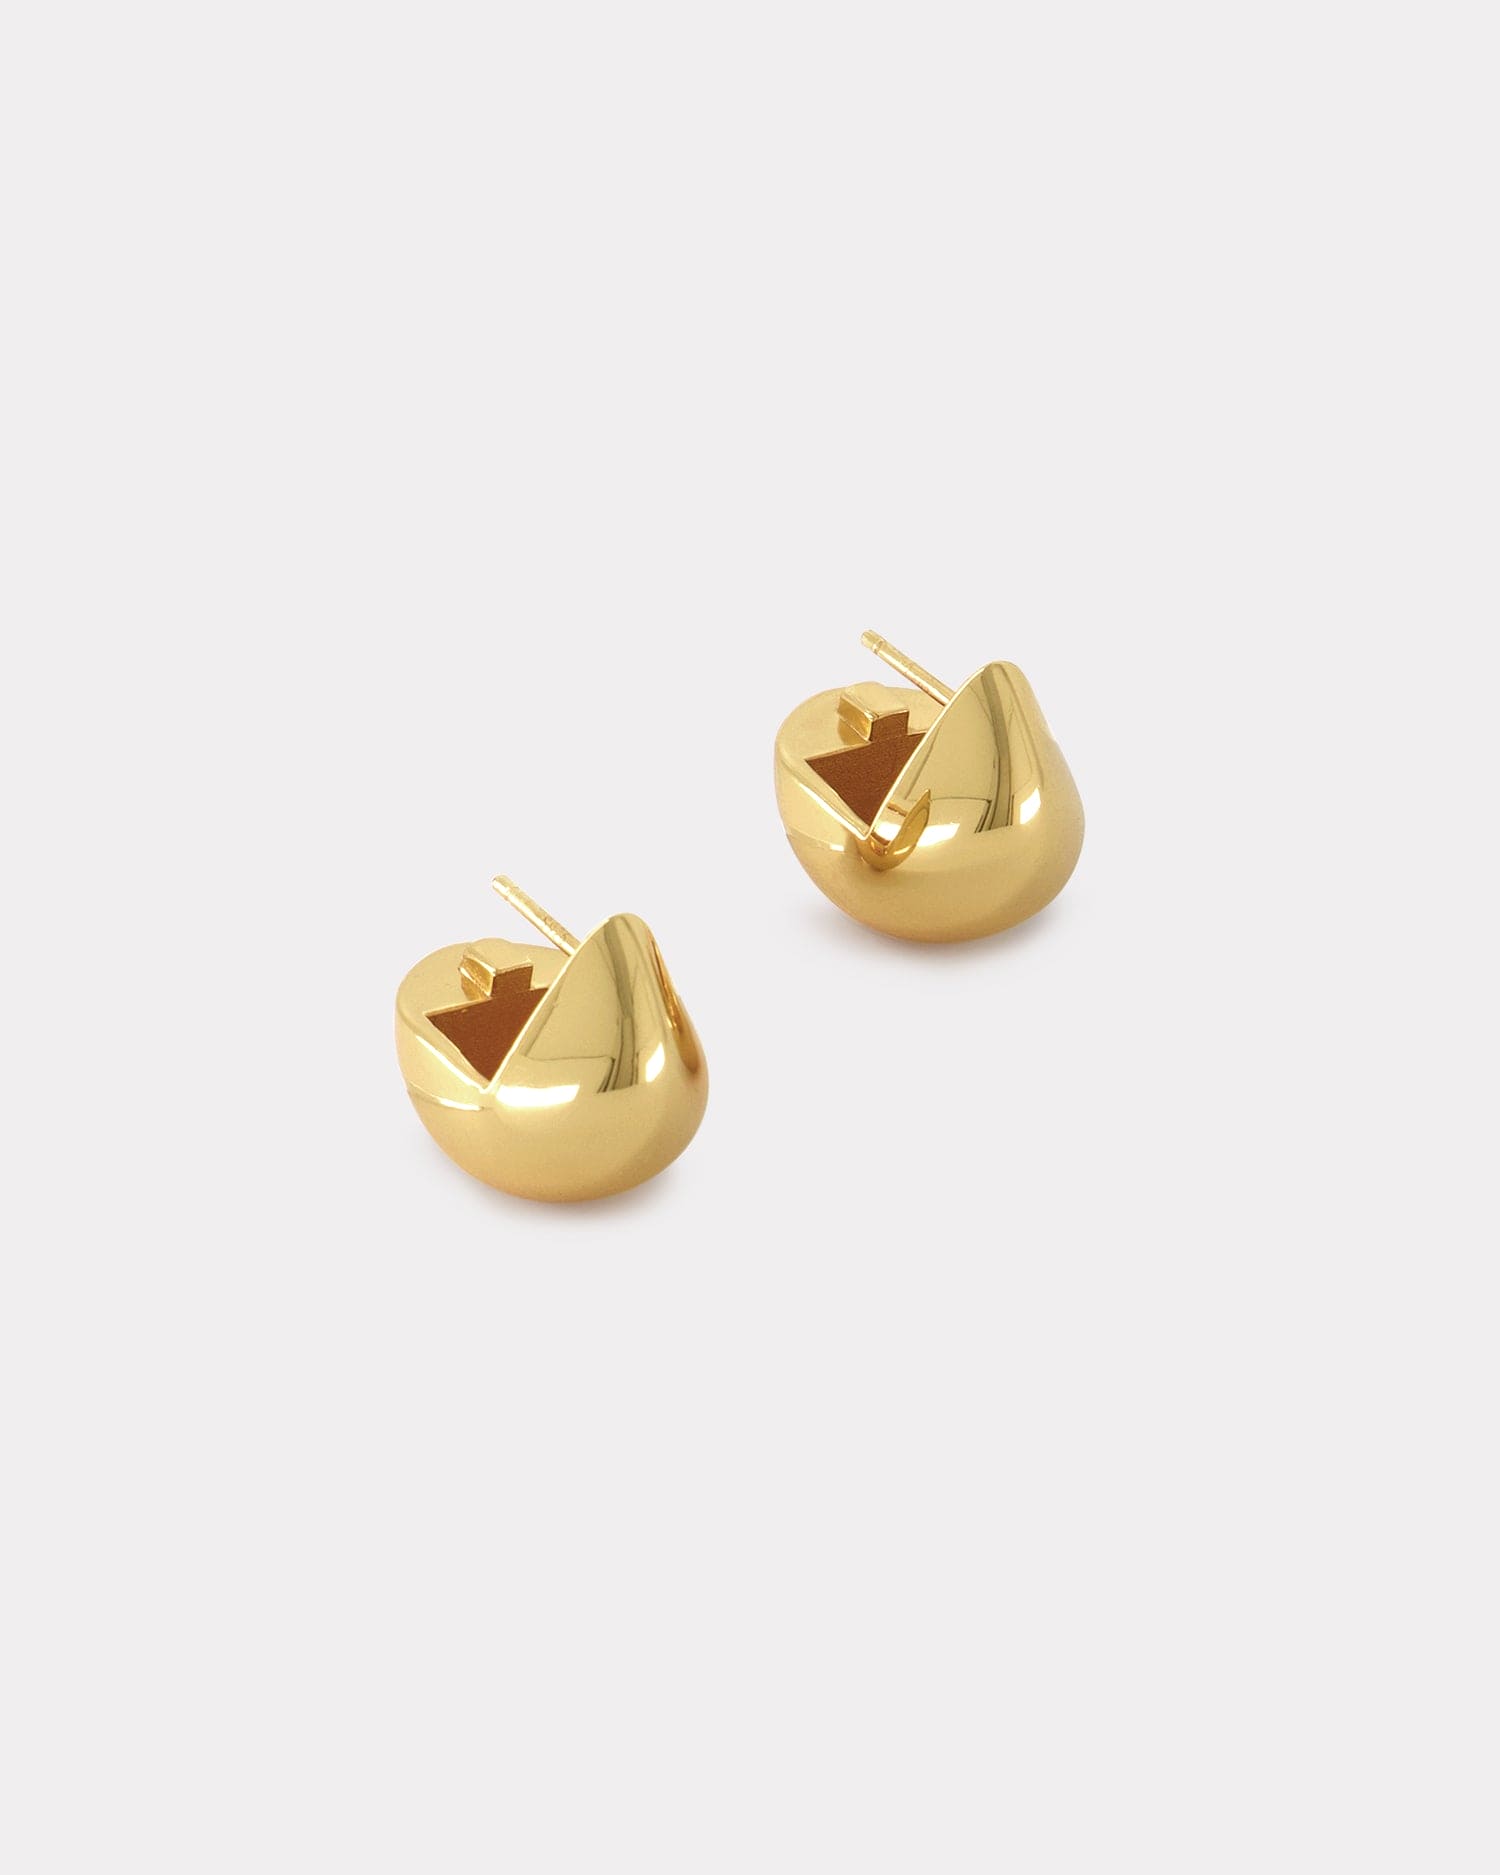 gold orb earrings made from recycled materials